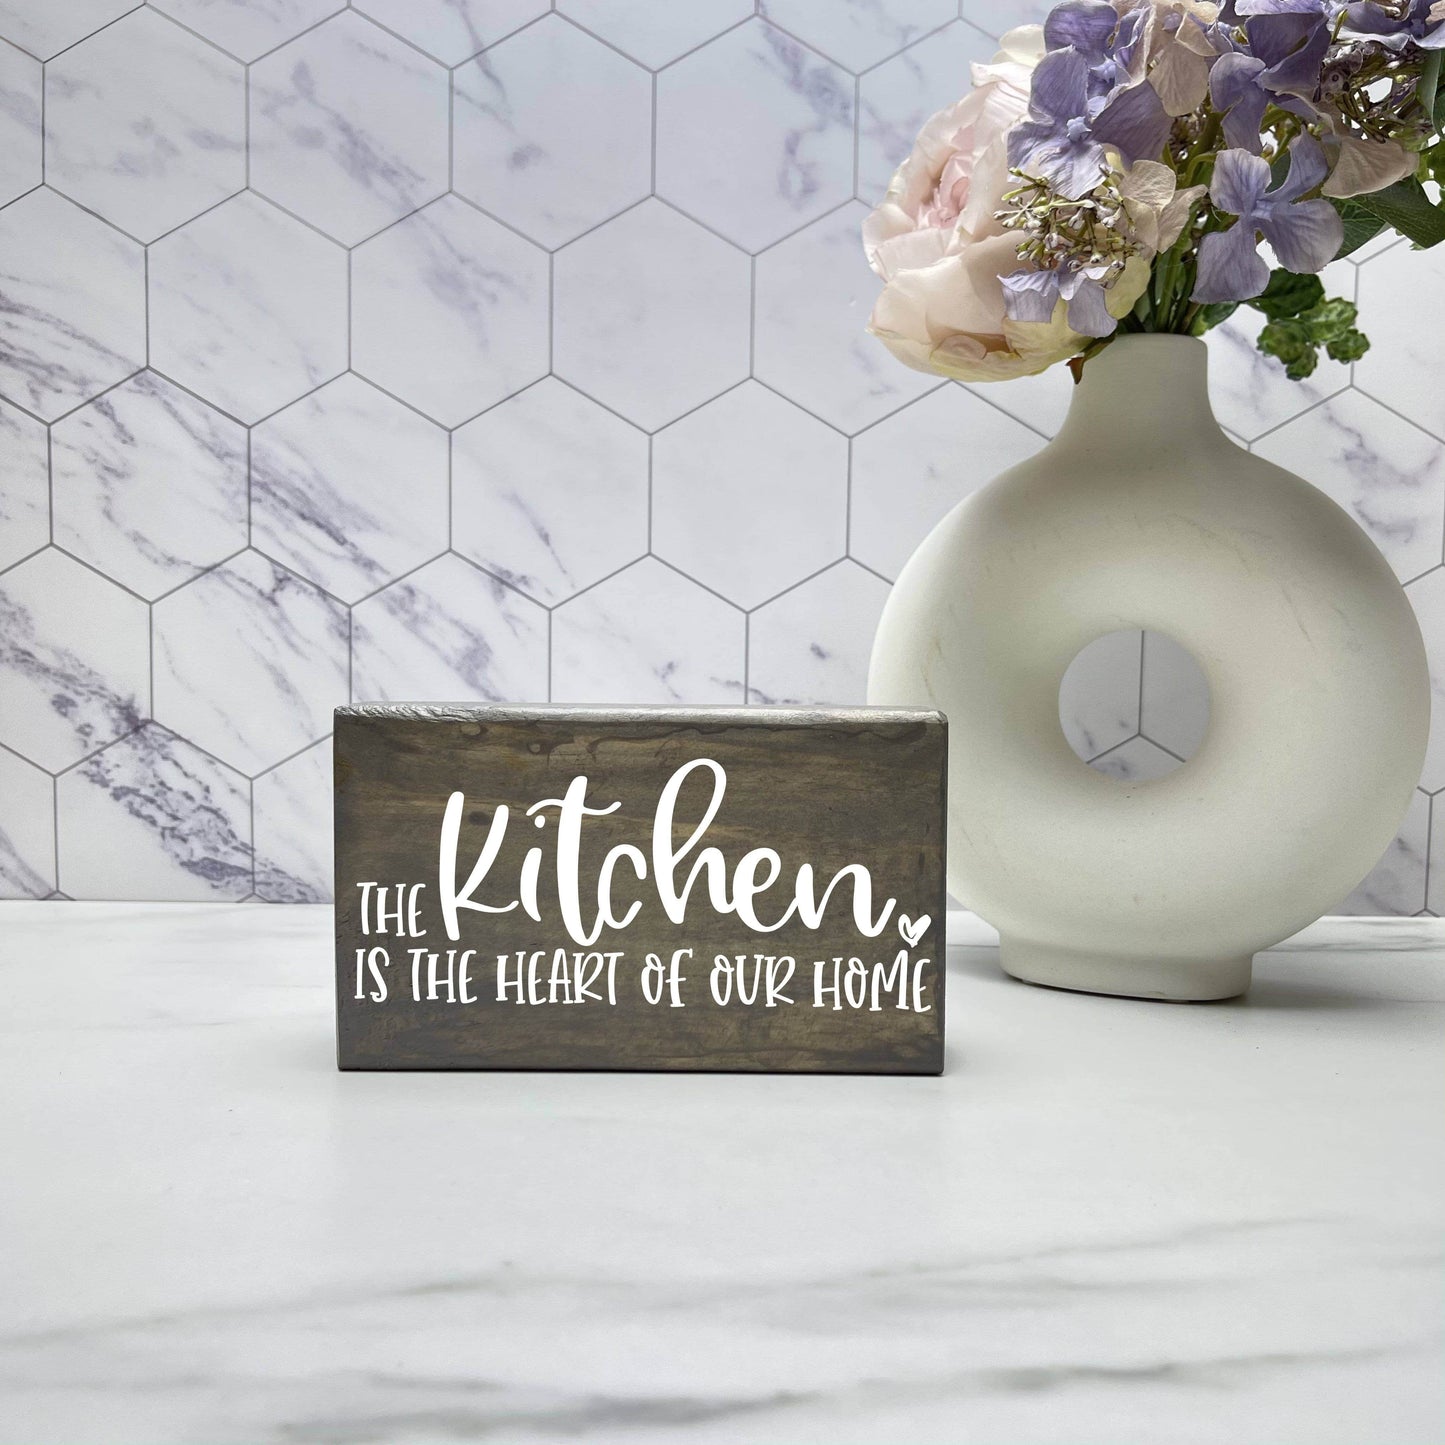 The Kitchen is the Heart of the Home, kitchen wood sign, kitchen decor, home decor